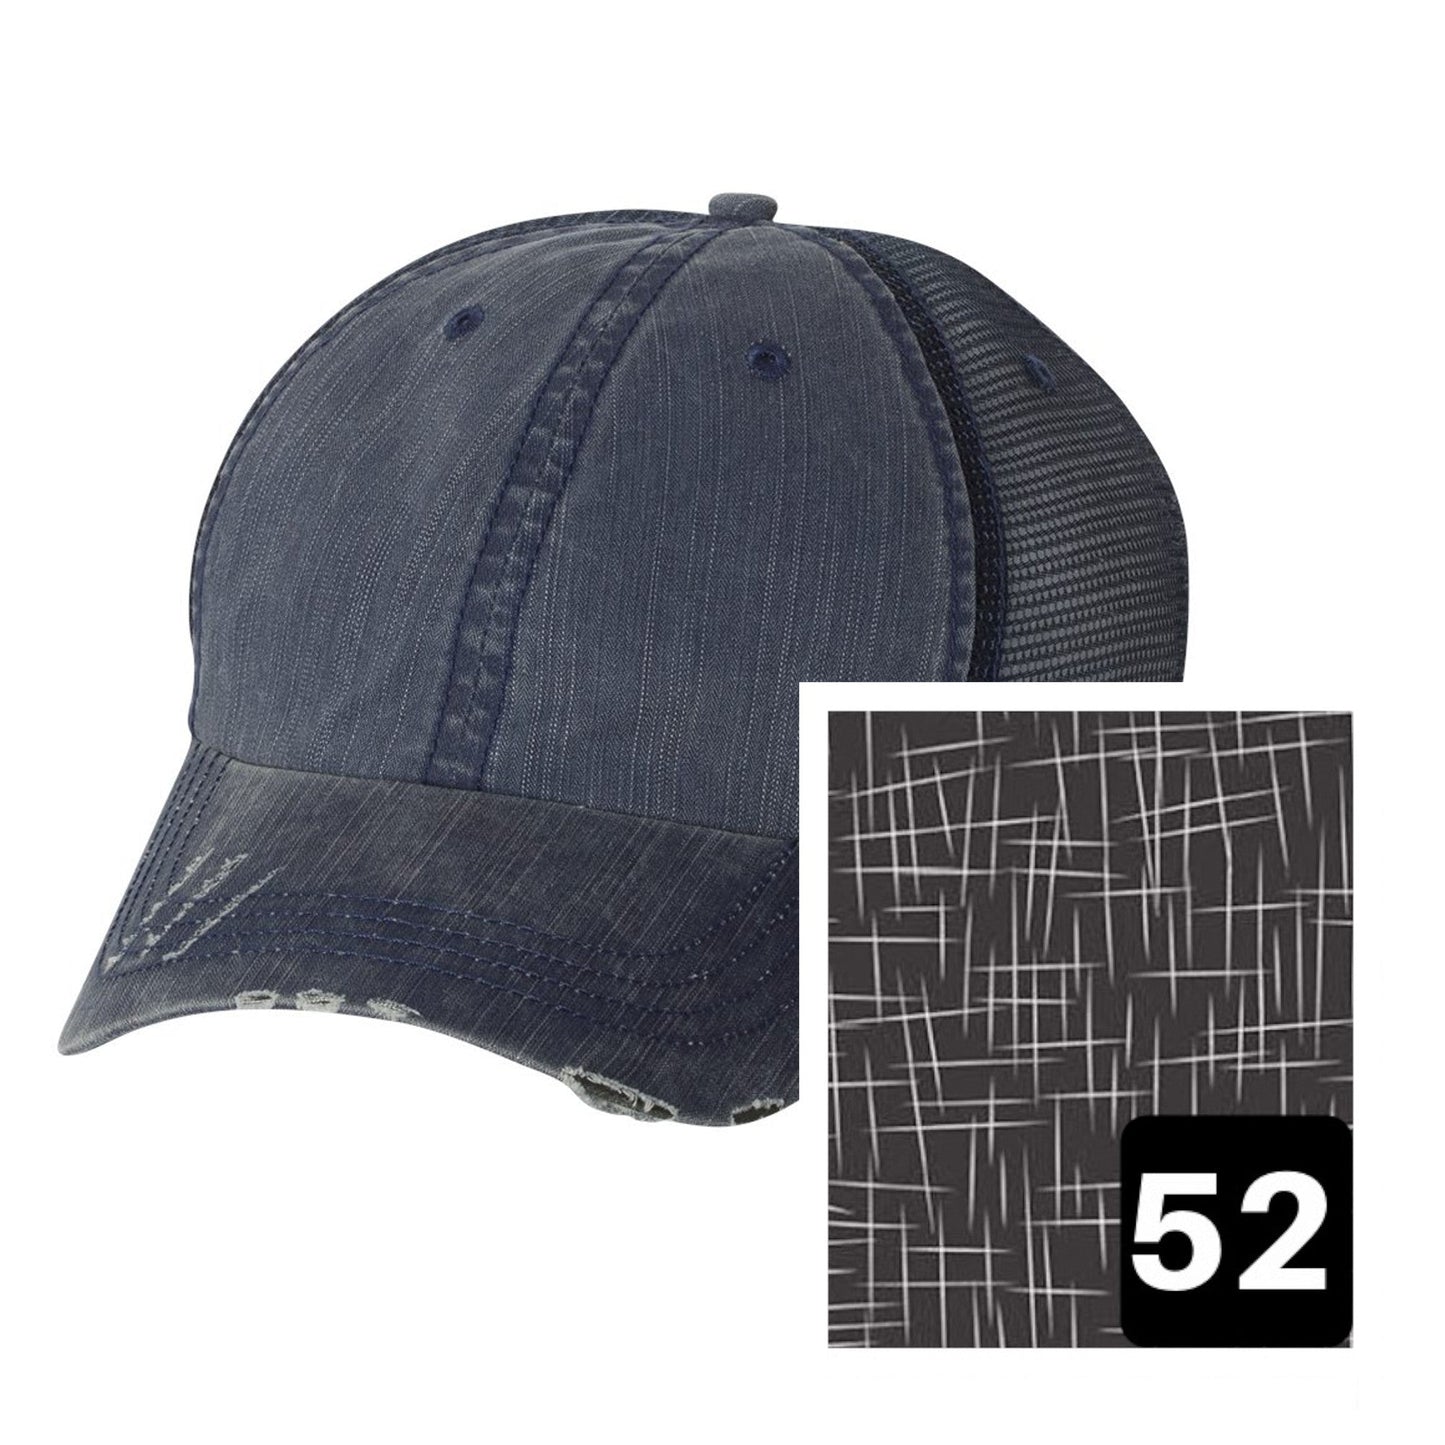 New York Hat | Navy Distressed Trucker Cap | Many Fabric Choices